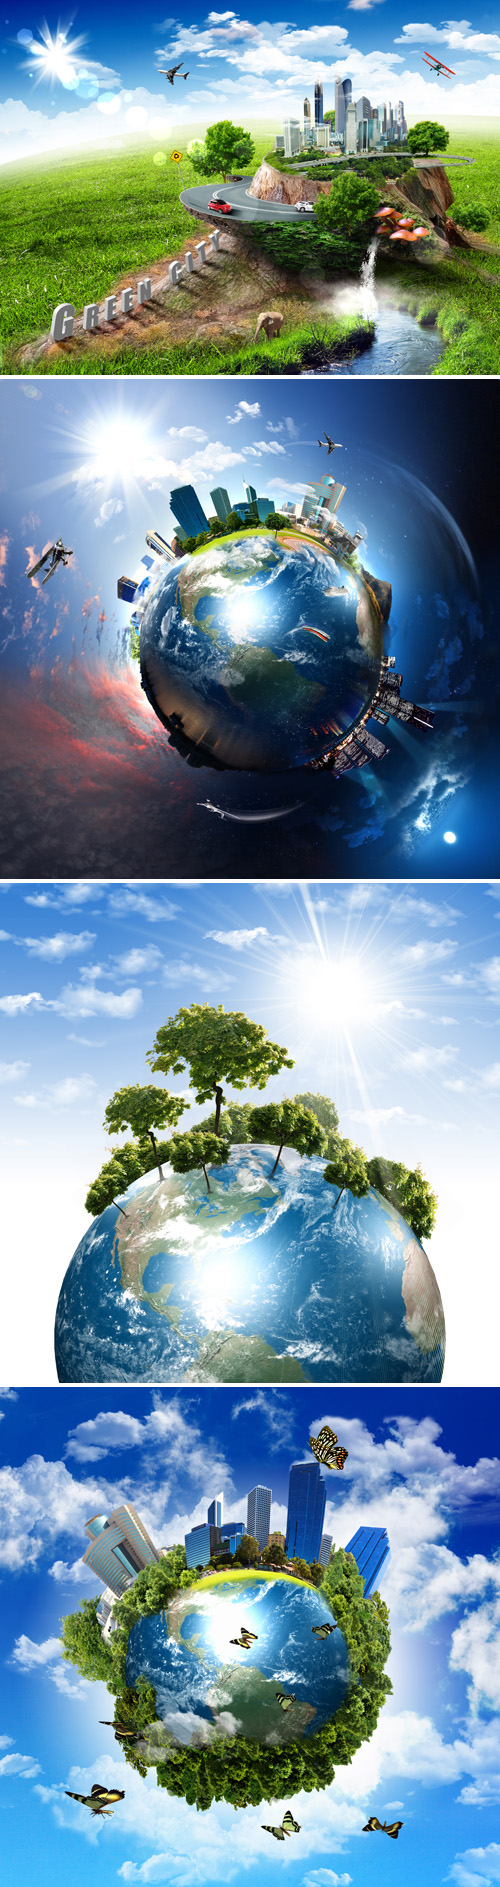 Stock Photos - Earth With The Different Elements